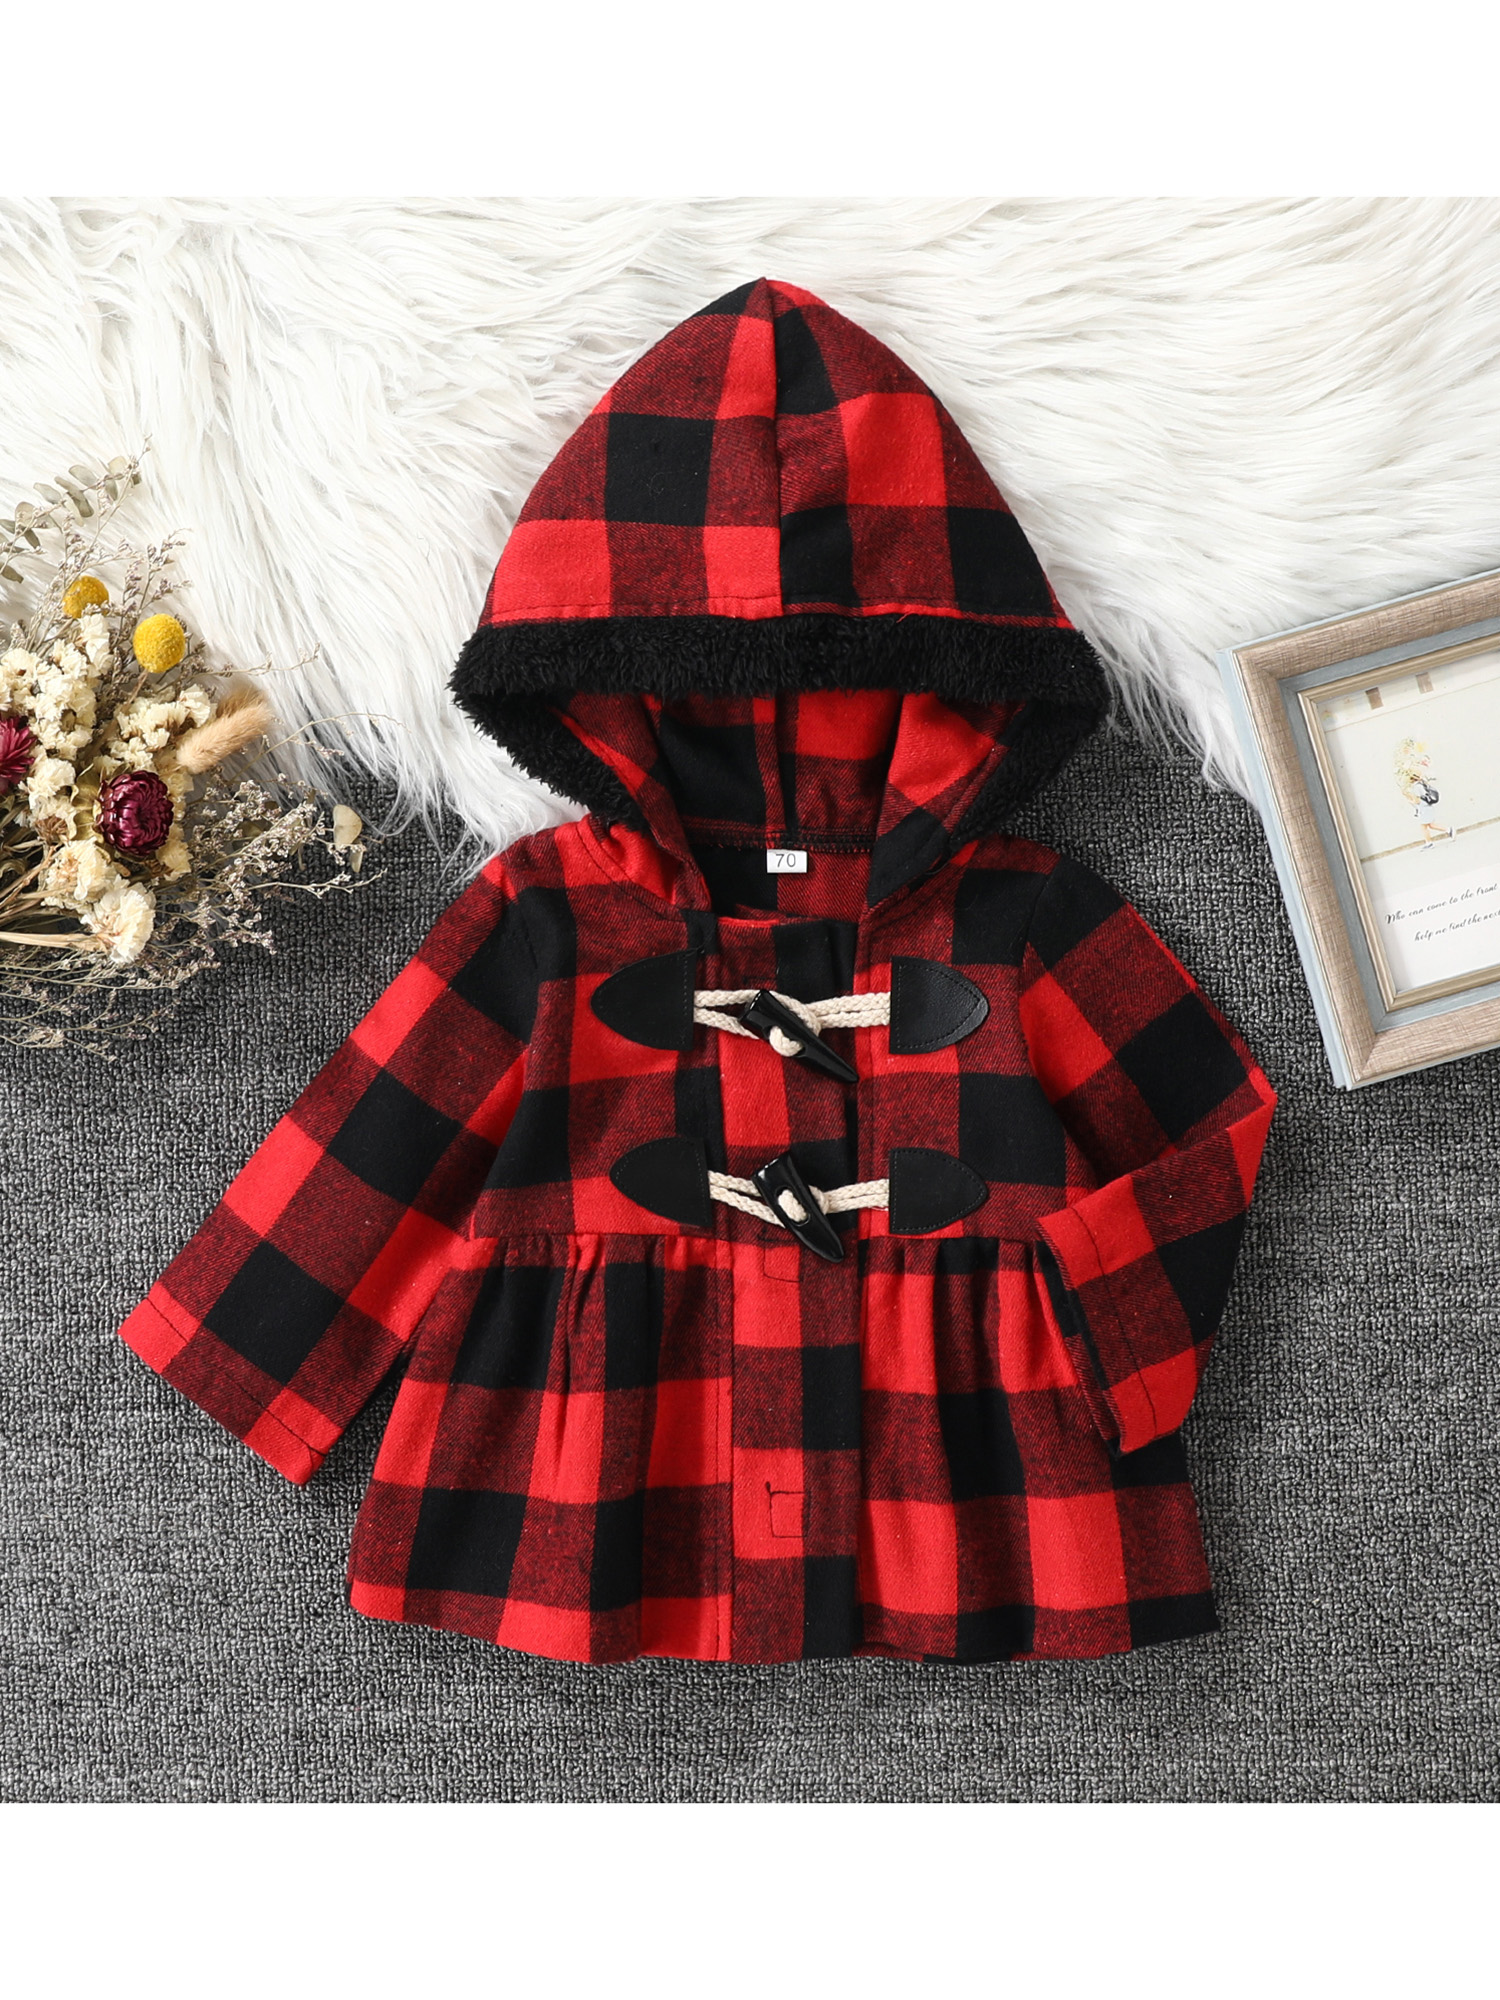 Gwiyeopda Toddler Baby Girls Hooded Coat Plaid Print Long Sleeves Horn Button Closure Autumn Winter A-Line Jacket - image 2 of 6